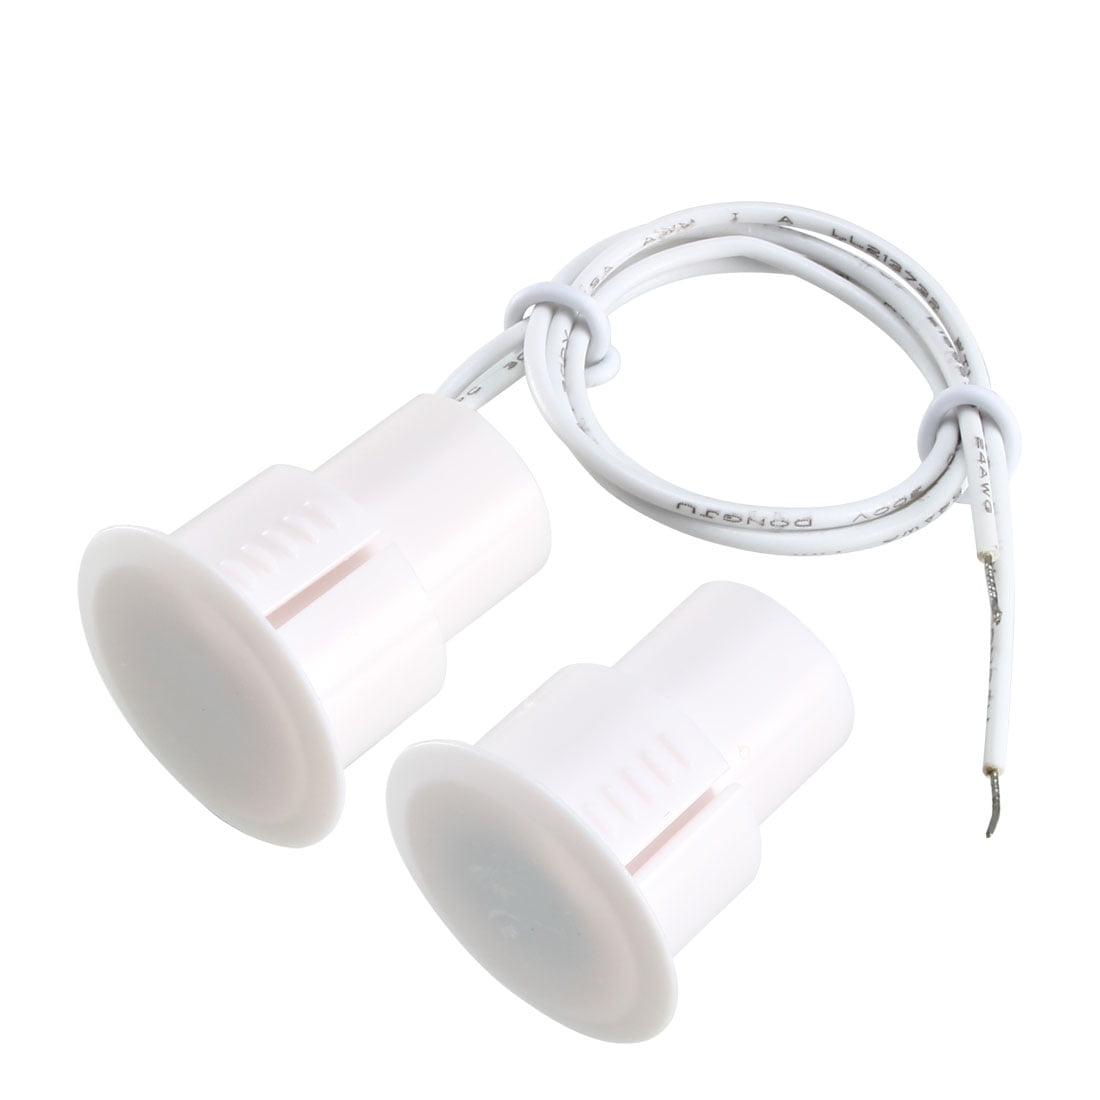 Rc-36 Normally Open Embedded Wired Sensor Alarm Anti Theft Window Door Contact Switch White 2 Pairs 